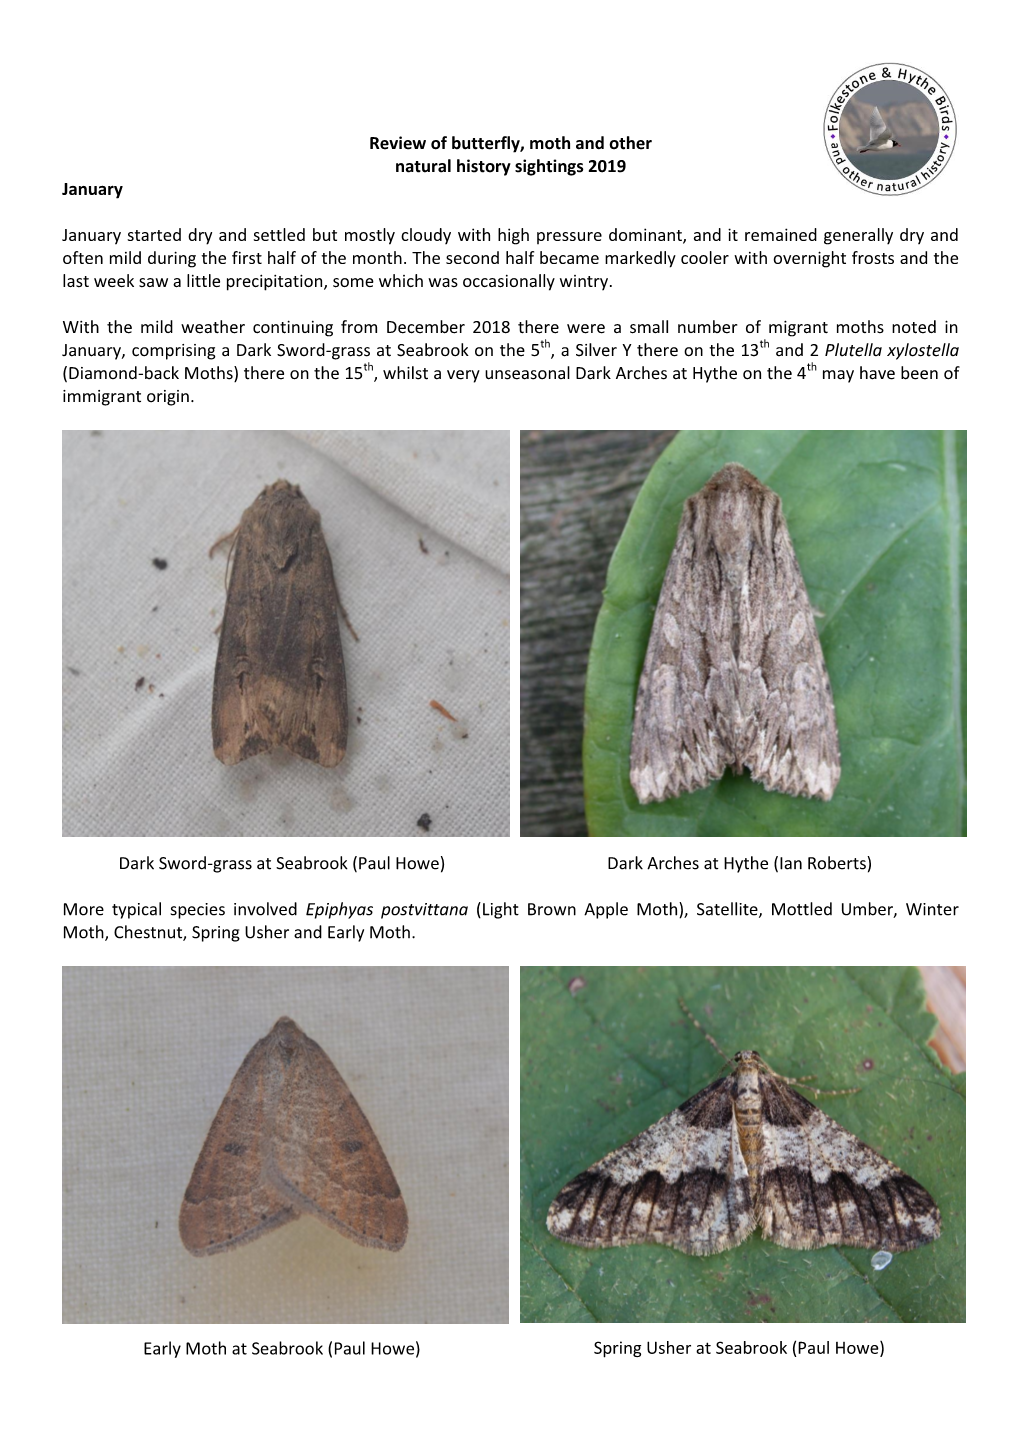 January Review of Butterfly, Moth and Other Natural History Sightings 2019